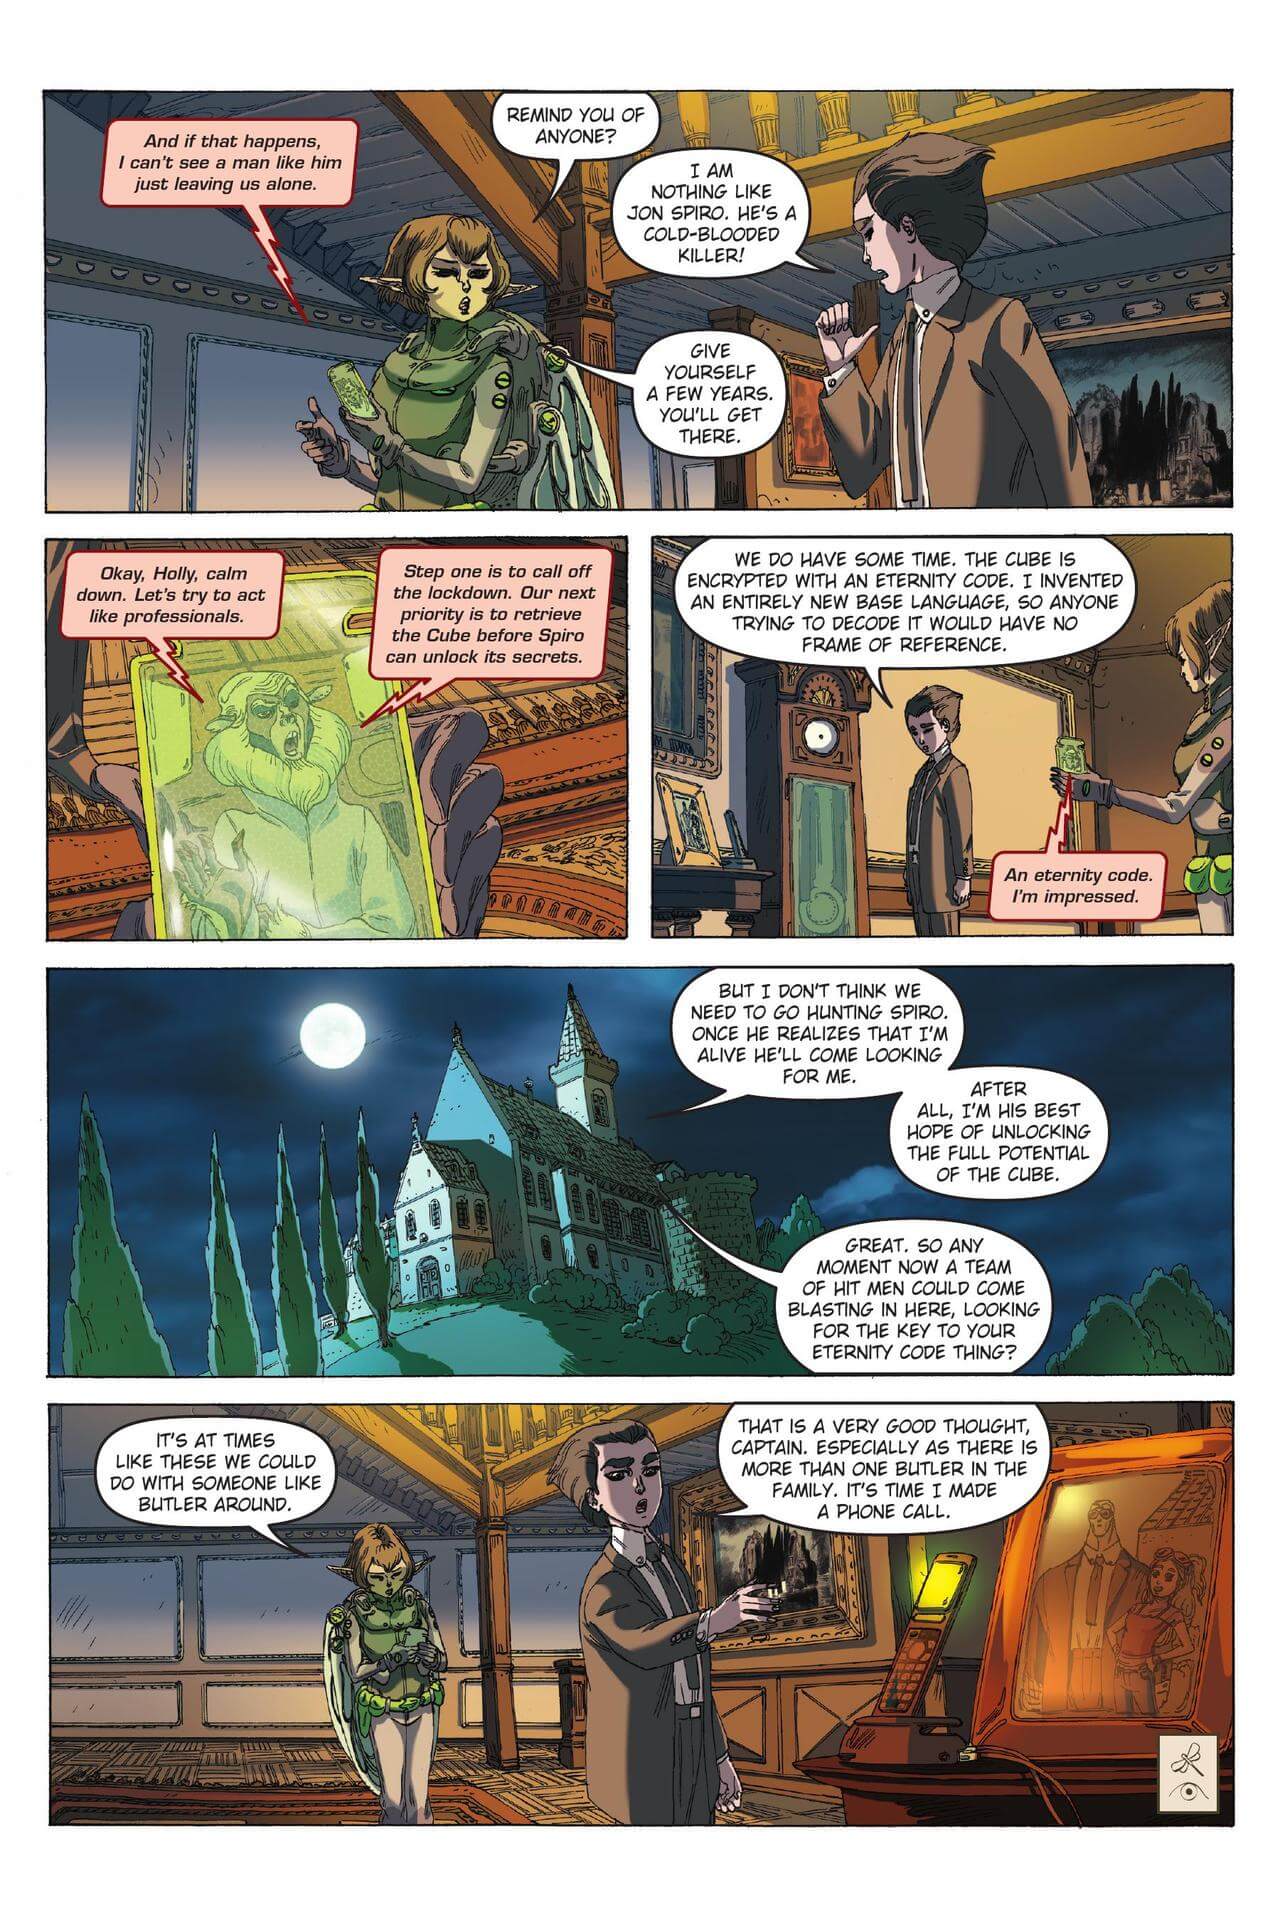 page 42 of artemis fowl eternity code graphic novel